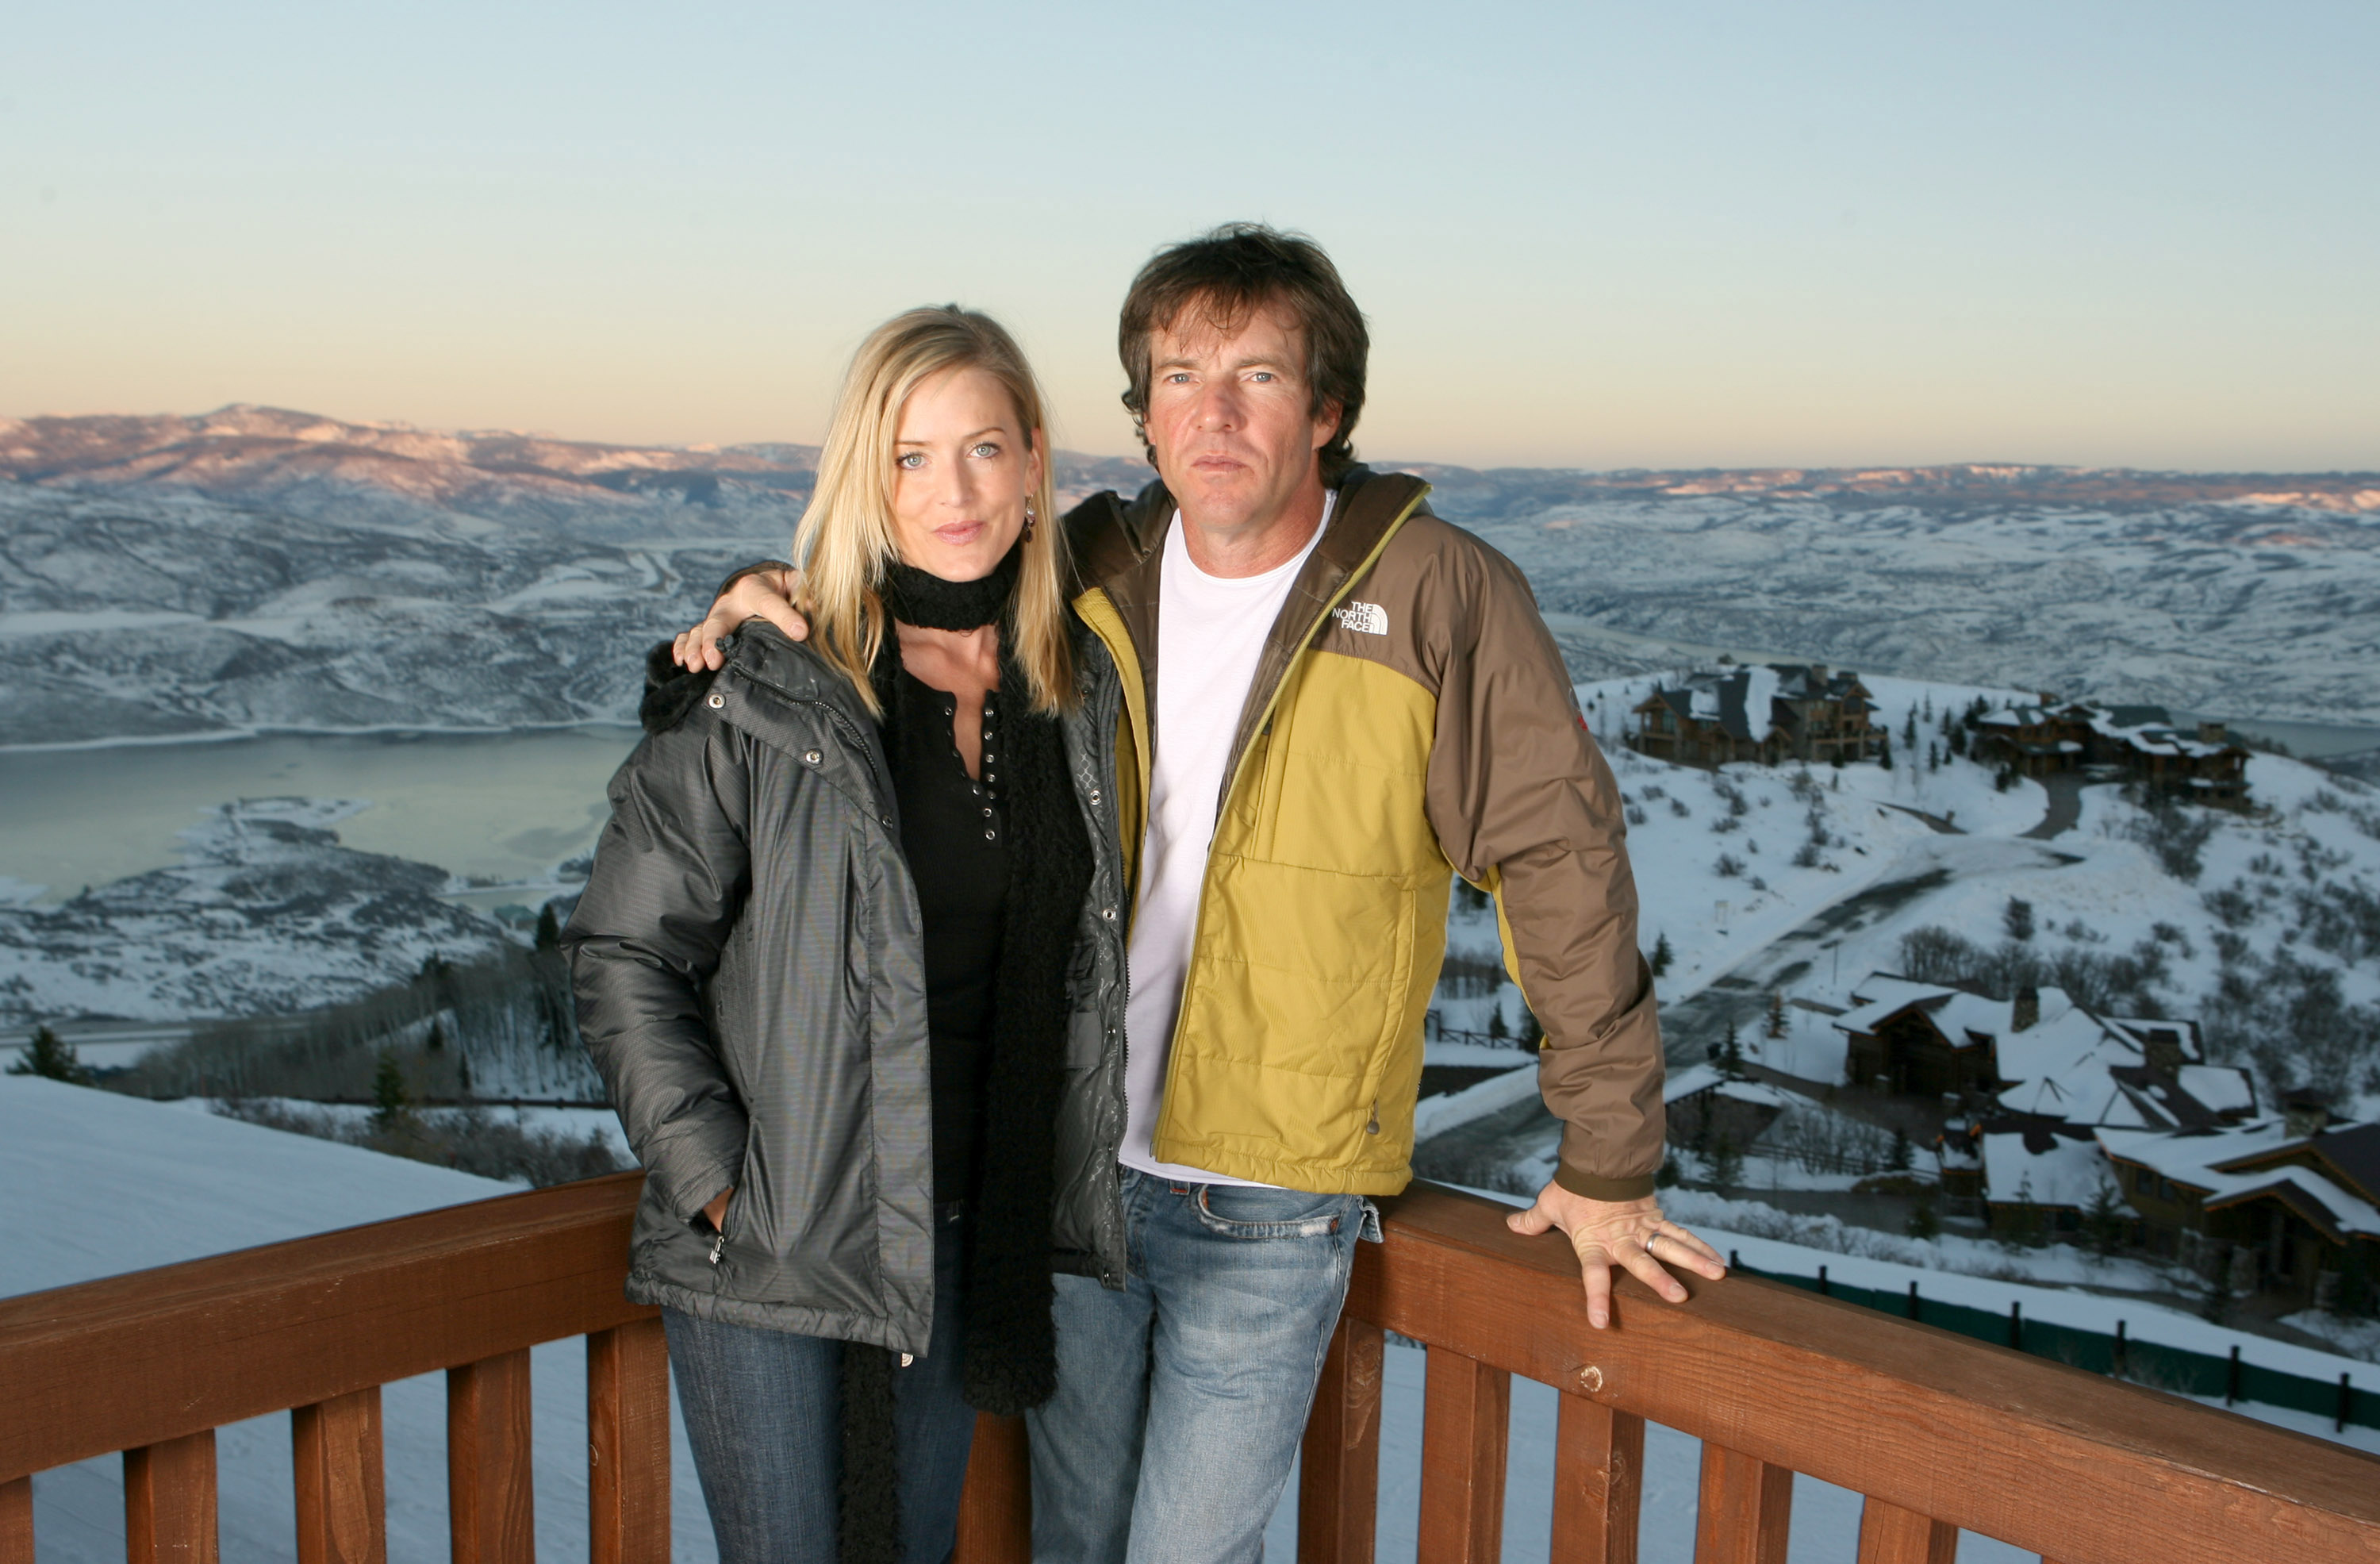 Dennis Quaid and Kimberly Buffington attend Sundance Film Festival on January 24, 2006 | Source: Getty Images